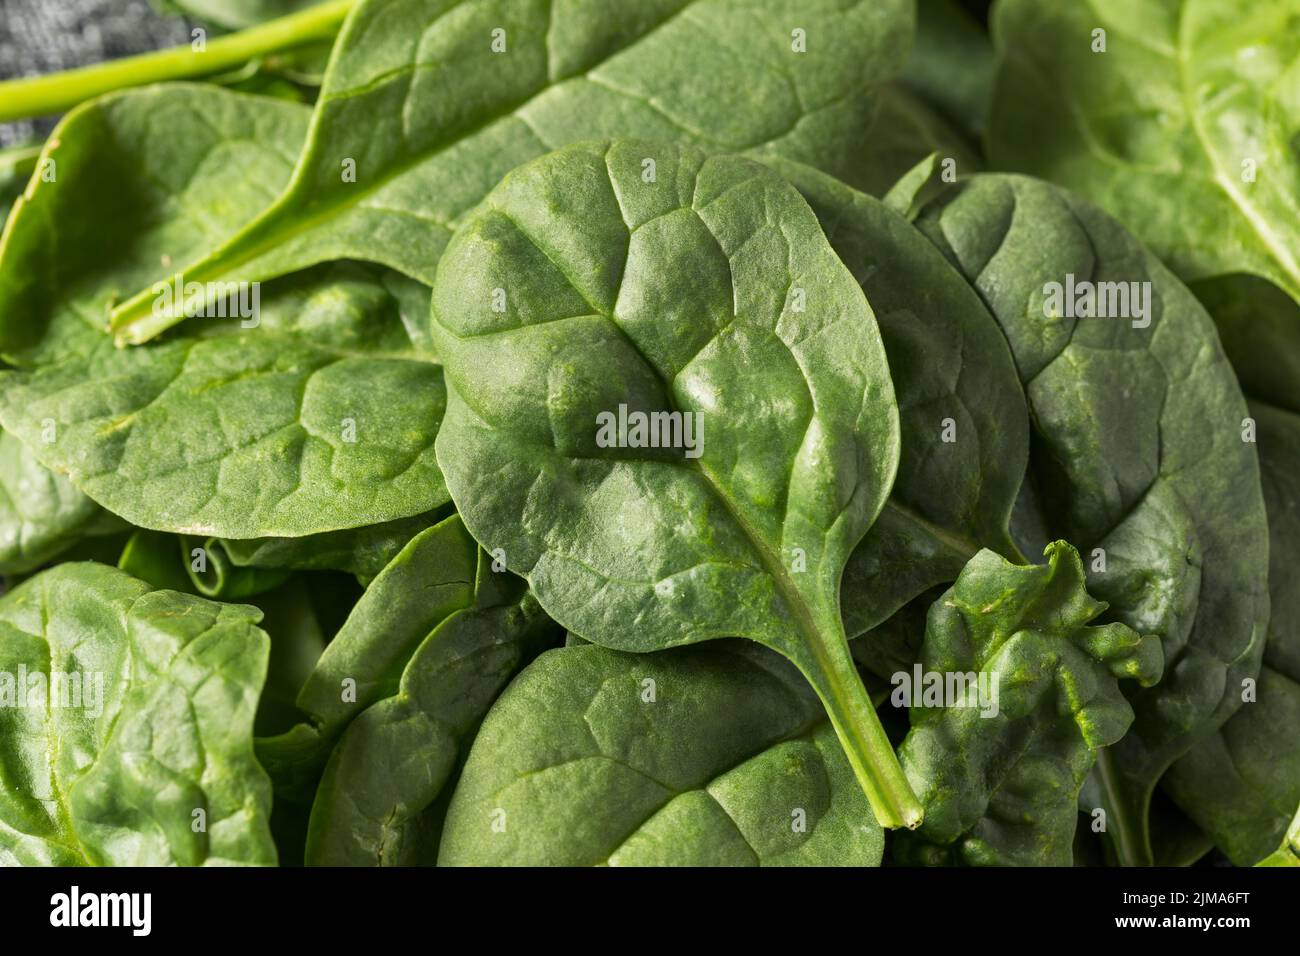 Raw Green Organic Baby Spinach Ready to Cook Stock Photo